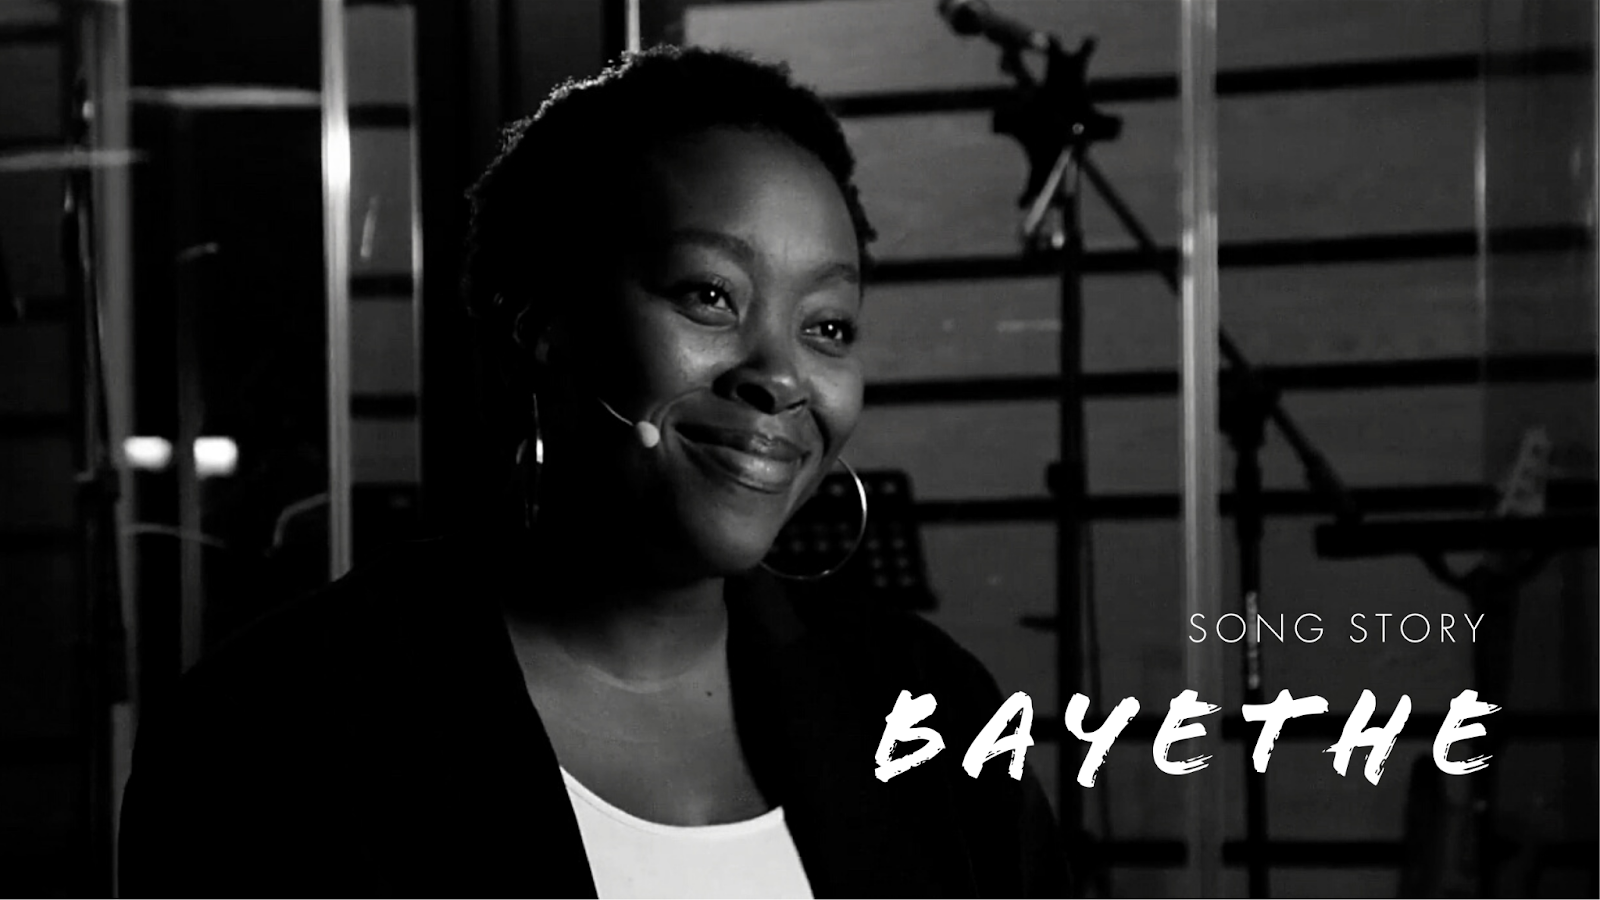 Bayethe – Song Story